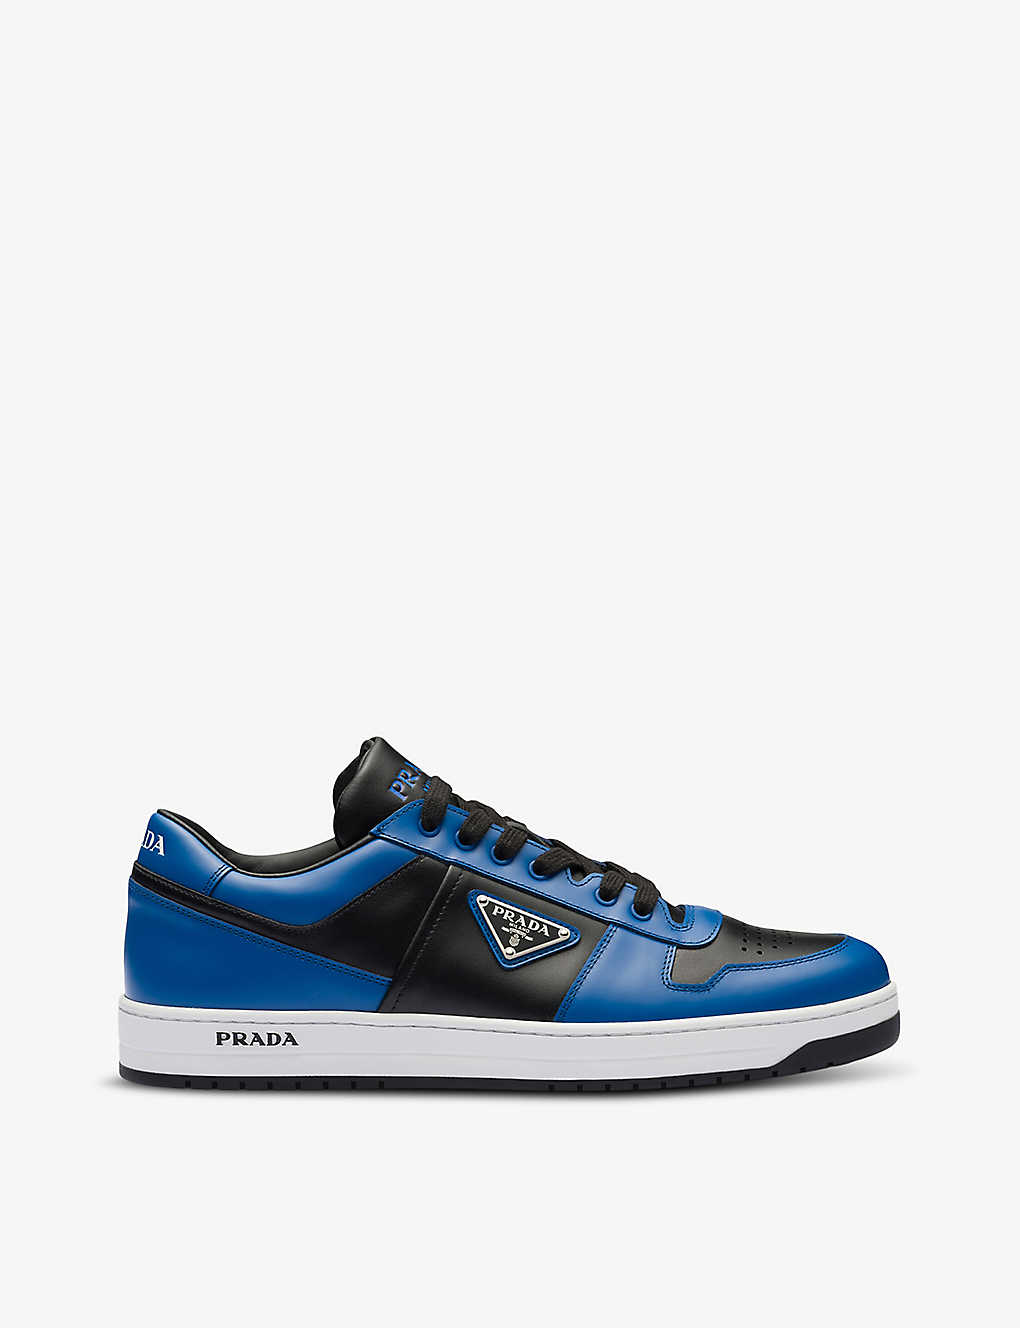 PRADA DOWNTOWN BRAND-PLAQUE LEATHER LOW-TOP TRAINERS